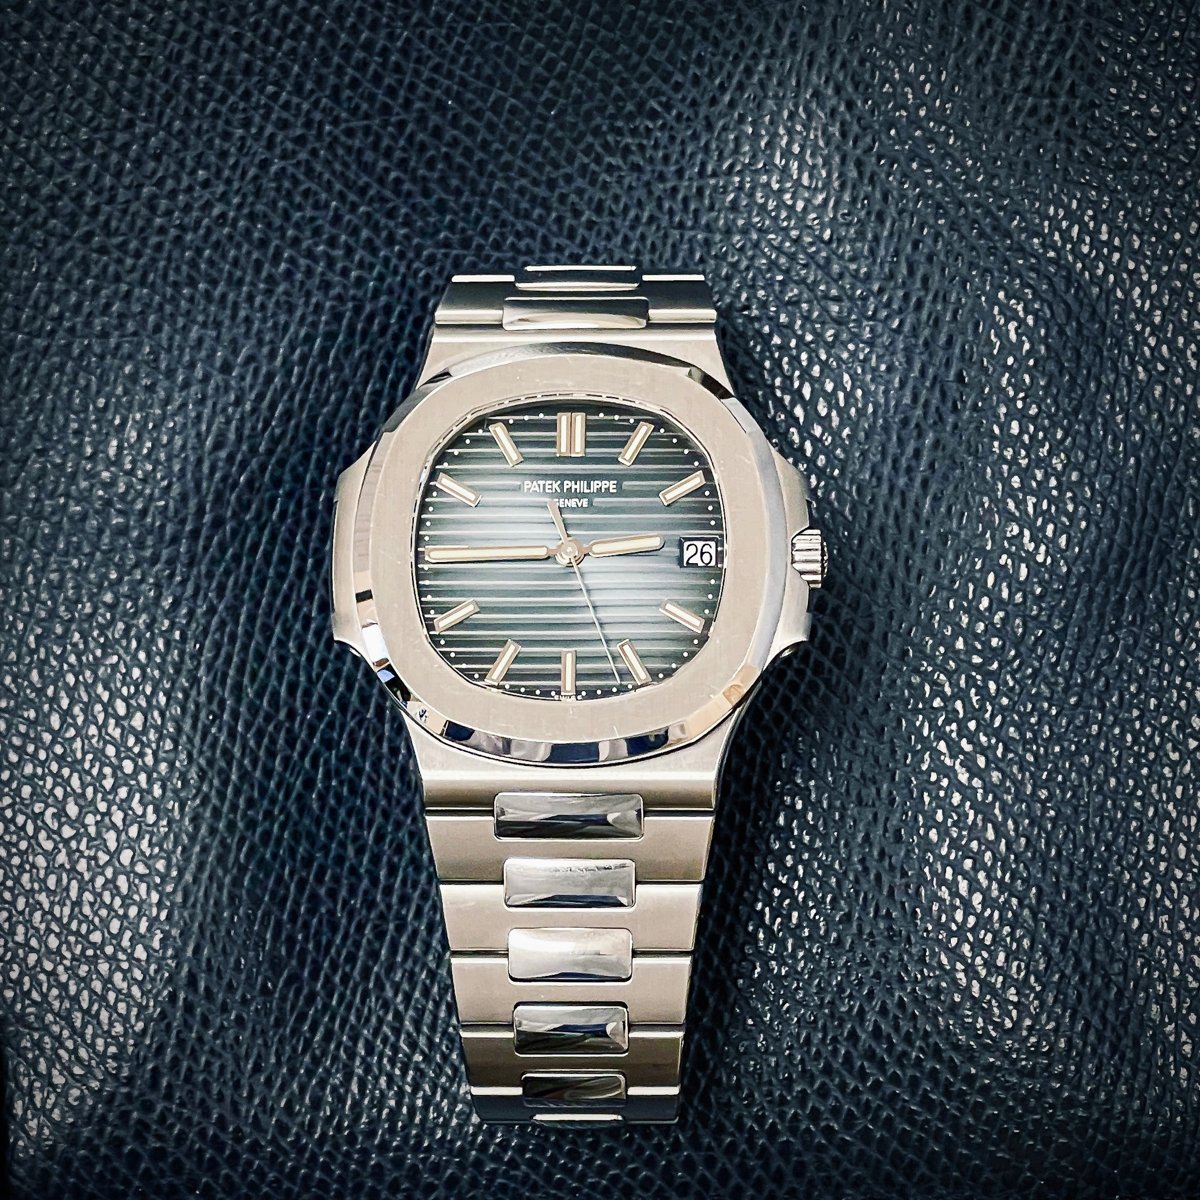 Patek Philippe Nautilus 5711/1A-010 and 16 Other Models To Be